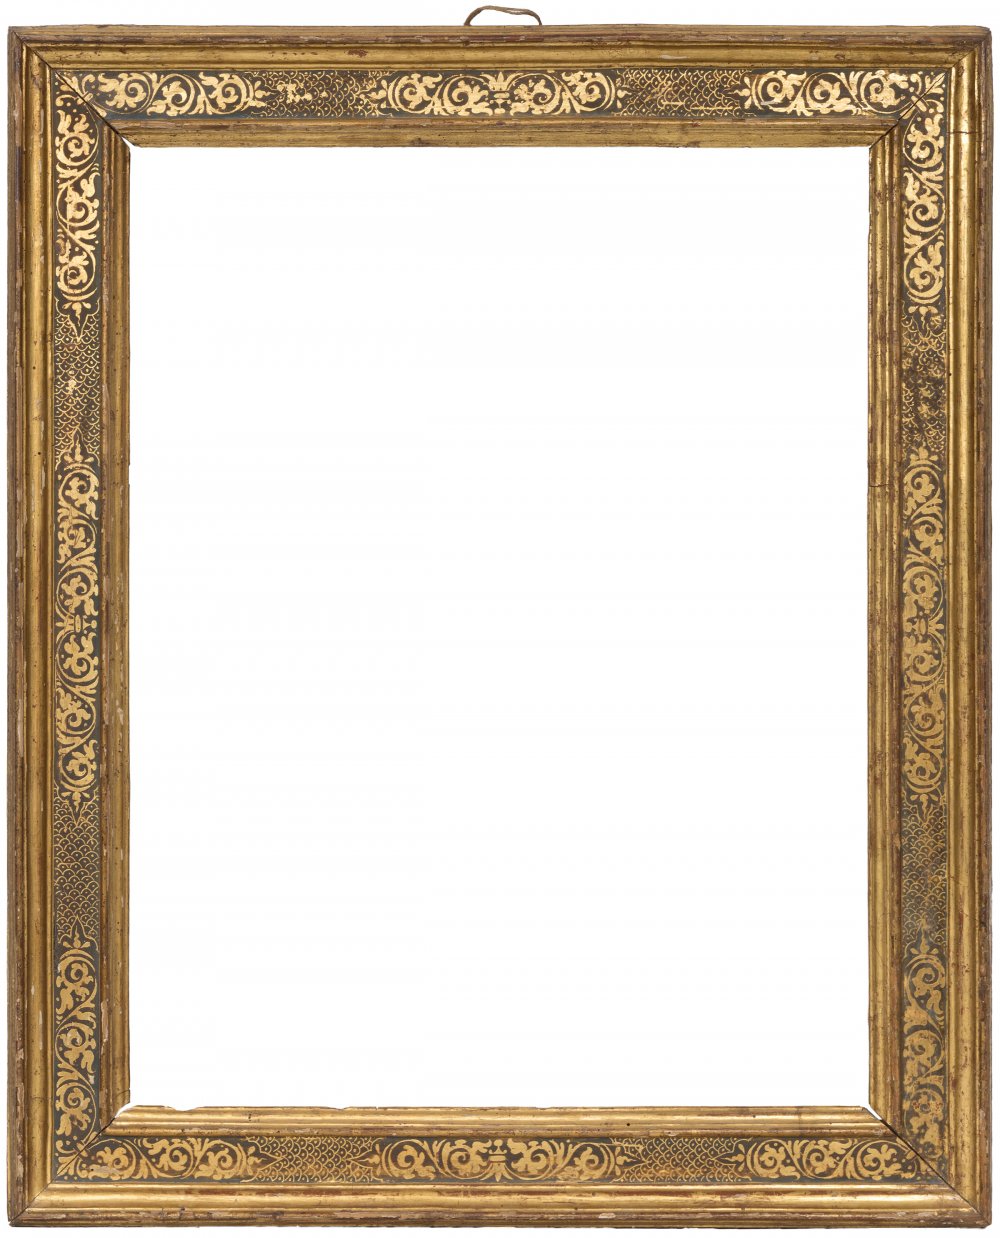 Frame; Italy, 16th century.Carved and stewed wood.Provenance: private collection conceived since the